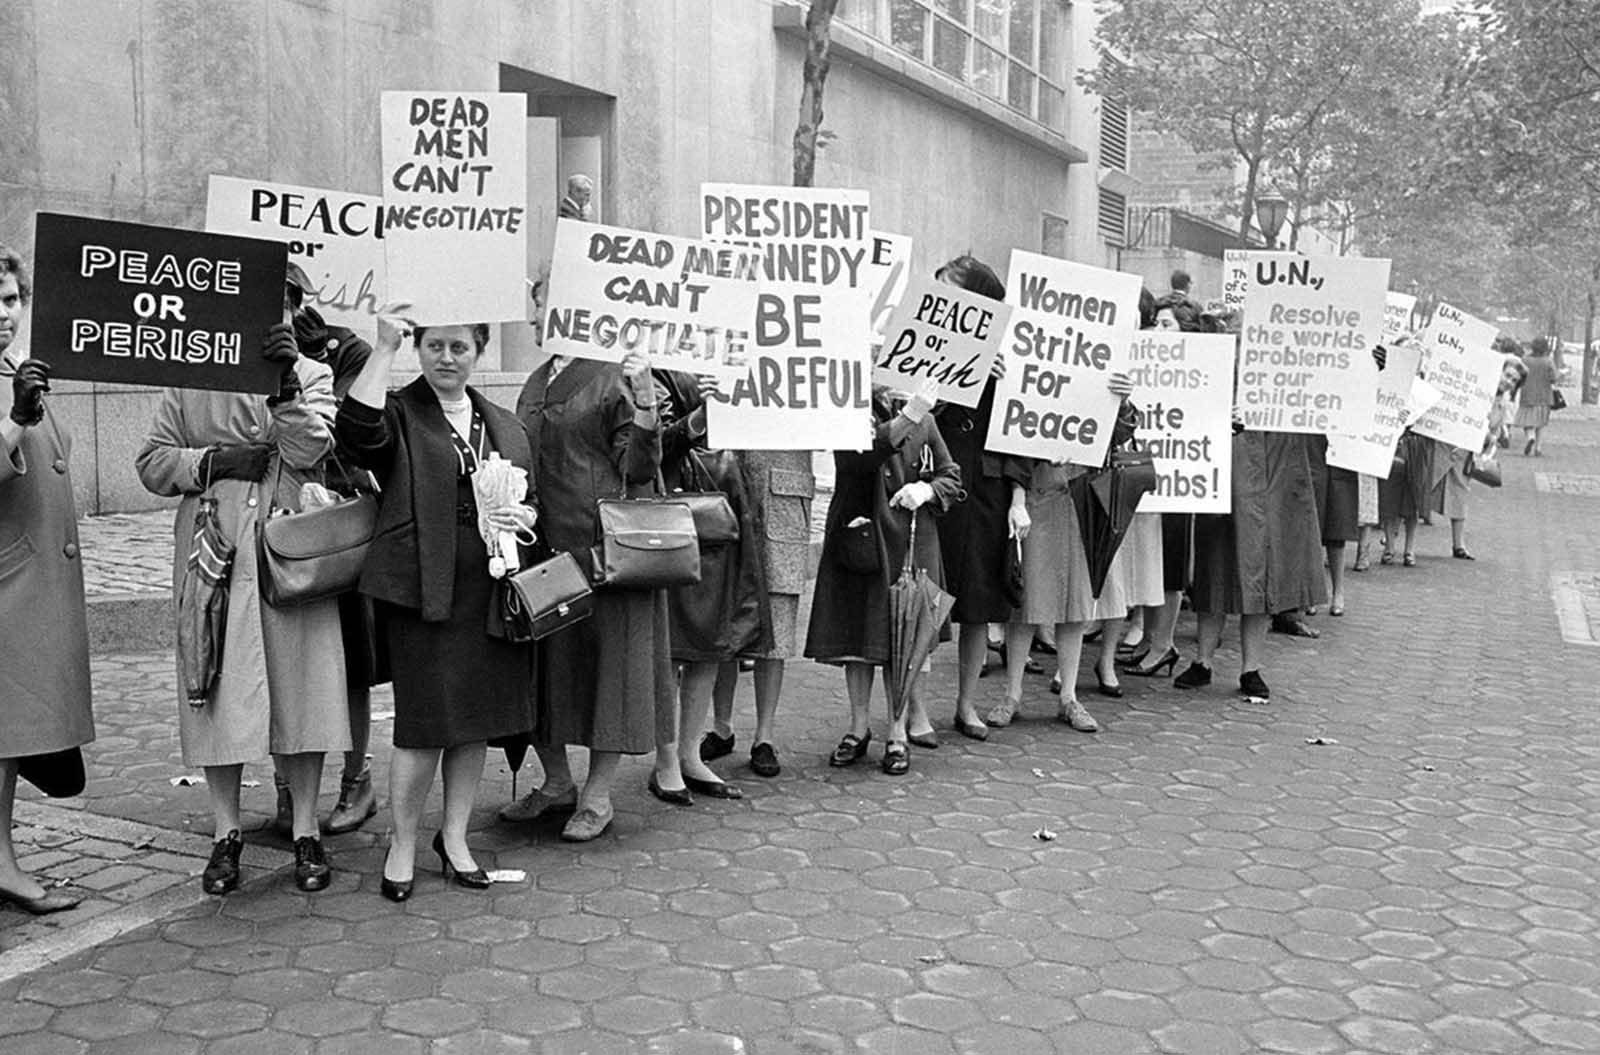 Picketers representing an organization known as Women Strike for Peace carry placards outside the United Nations headquarters in New York City, where the U.N. Security Council considers the Cuban missile crisis in a special meeting, on October 23, 1962.